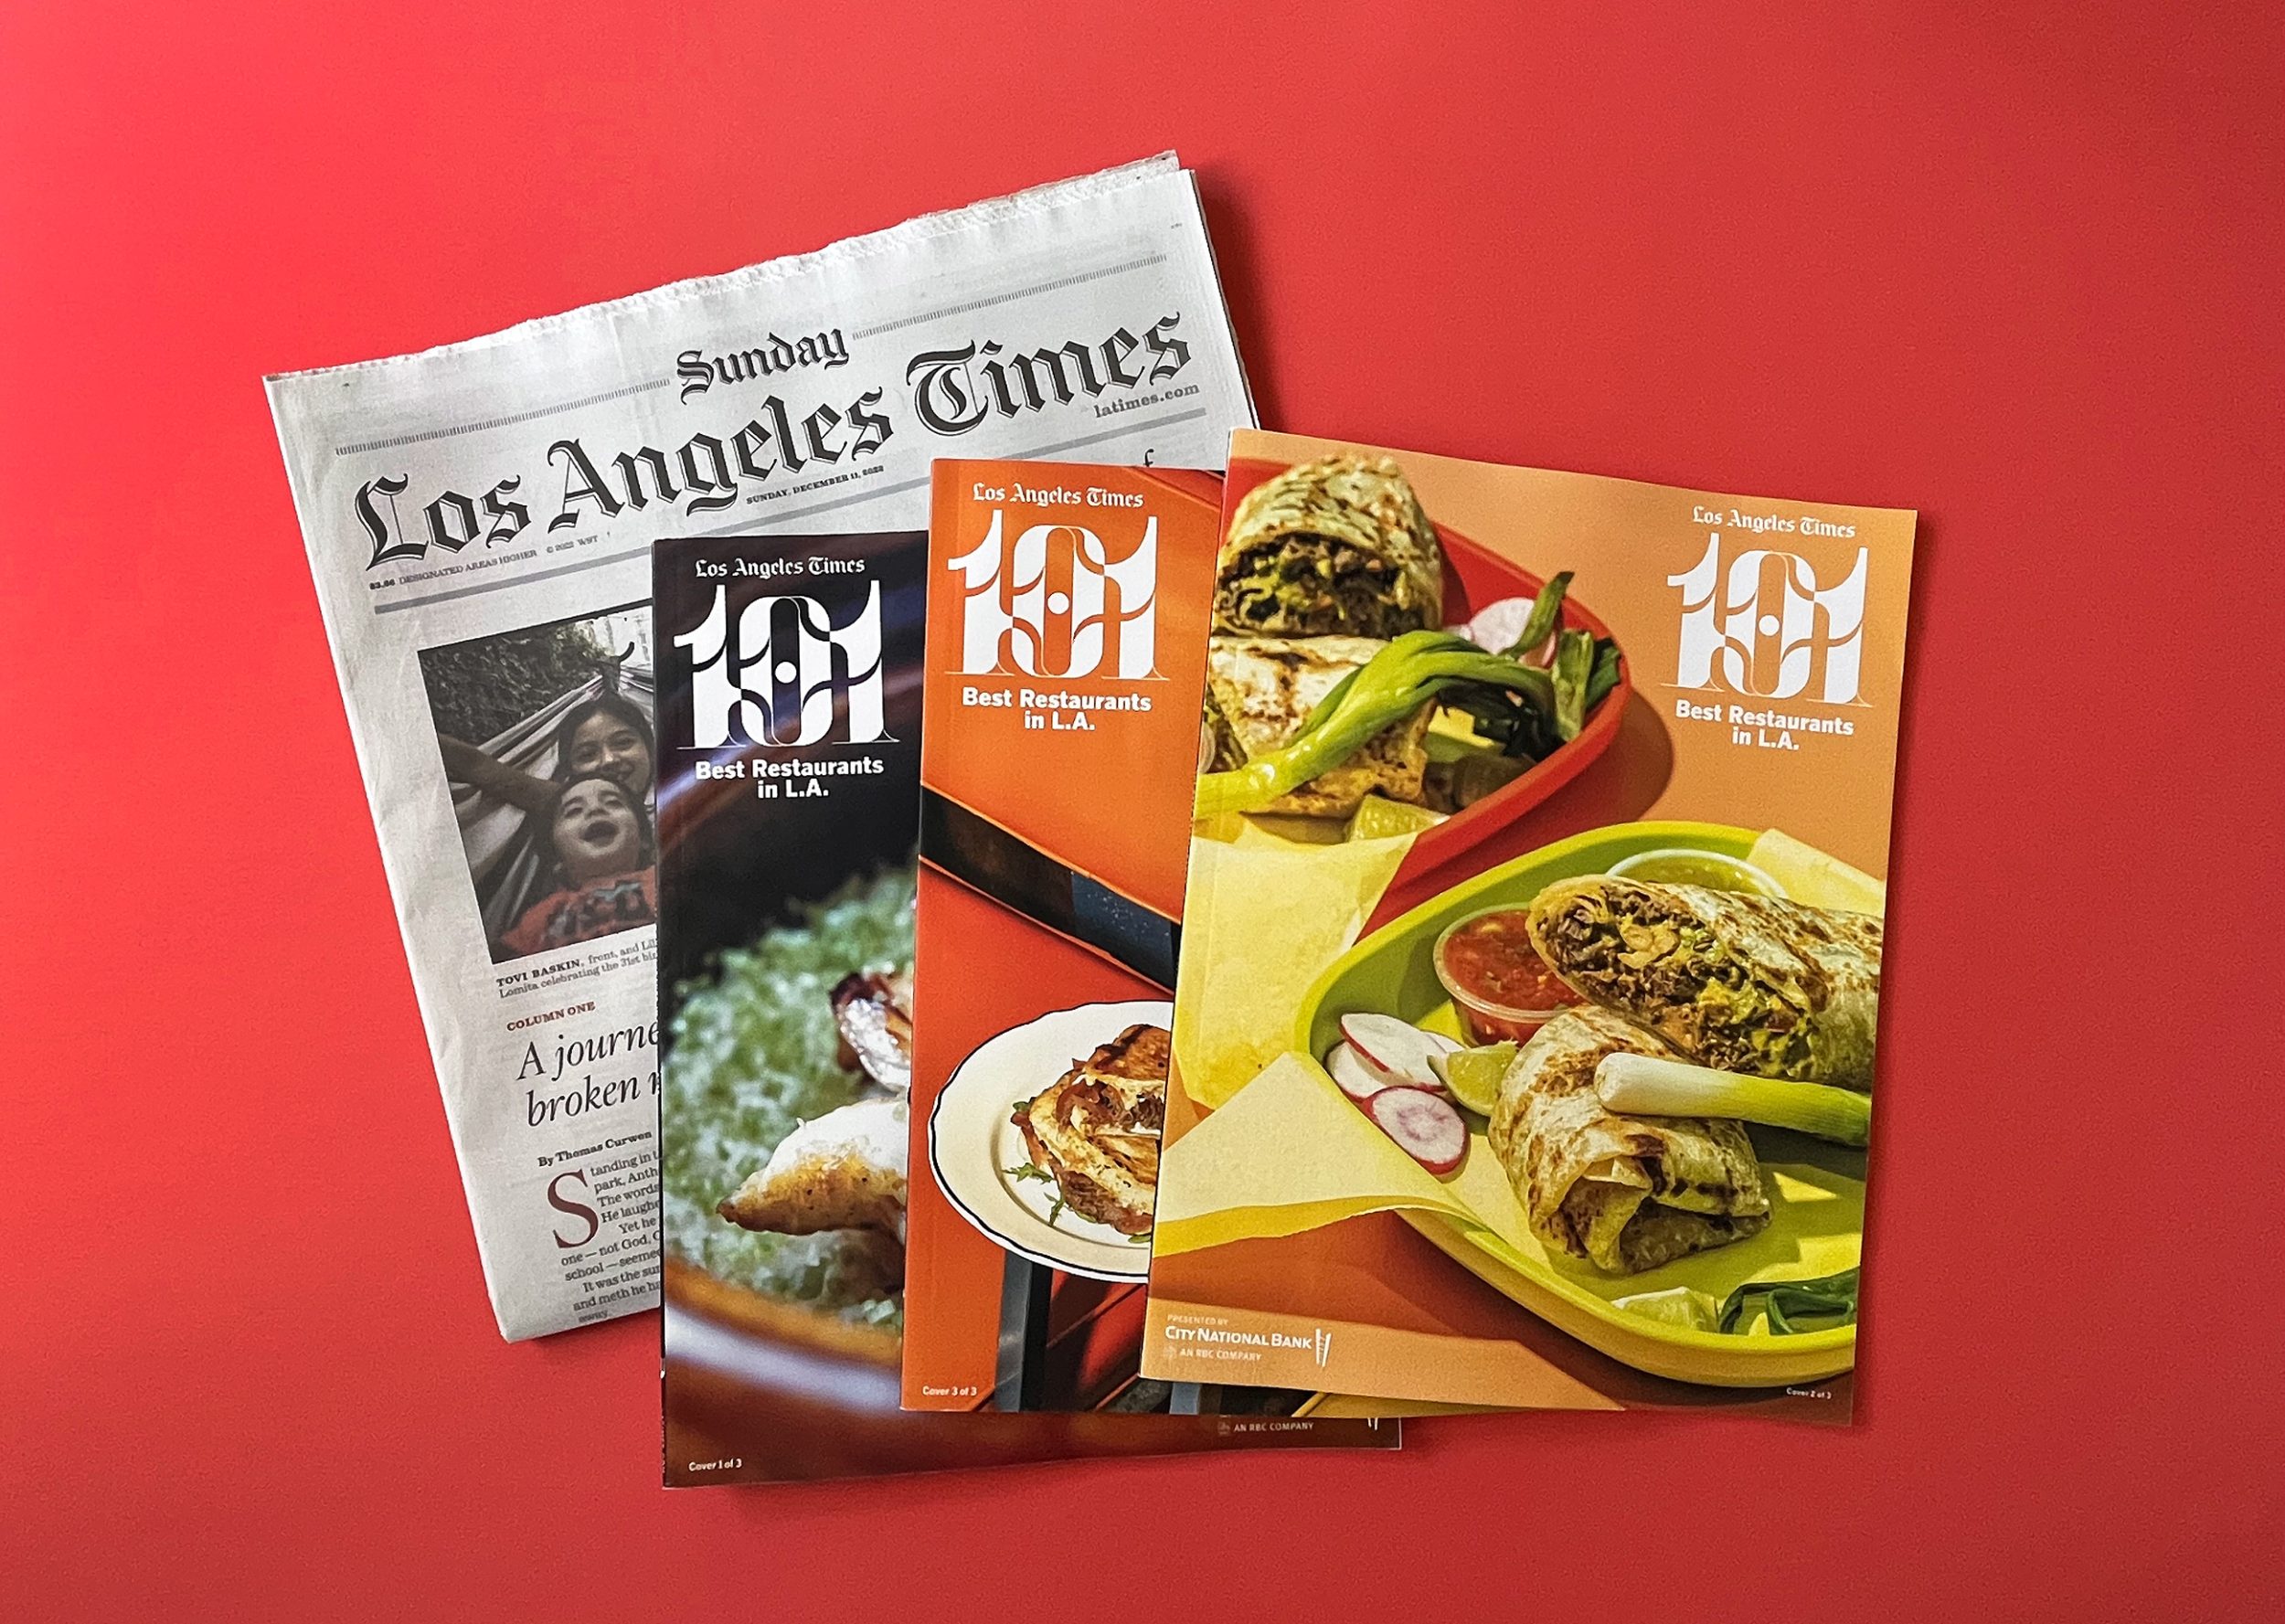 los angeles times newspaper with 3 101 best list magazines fanned out on red backdrop